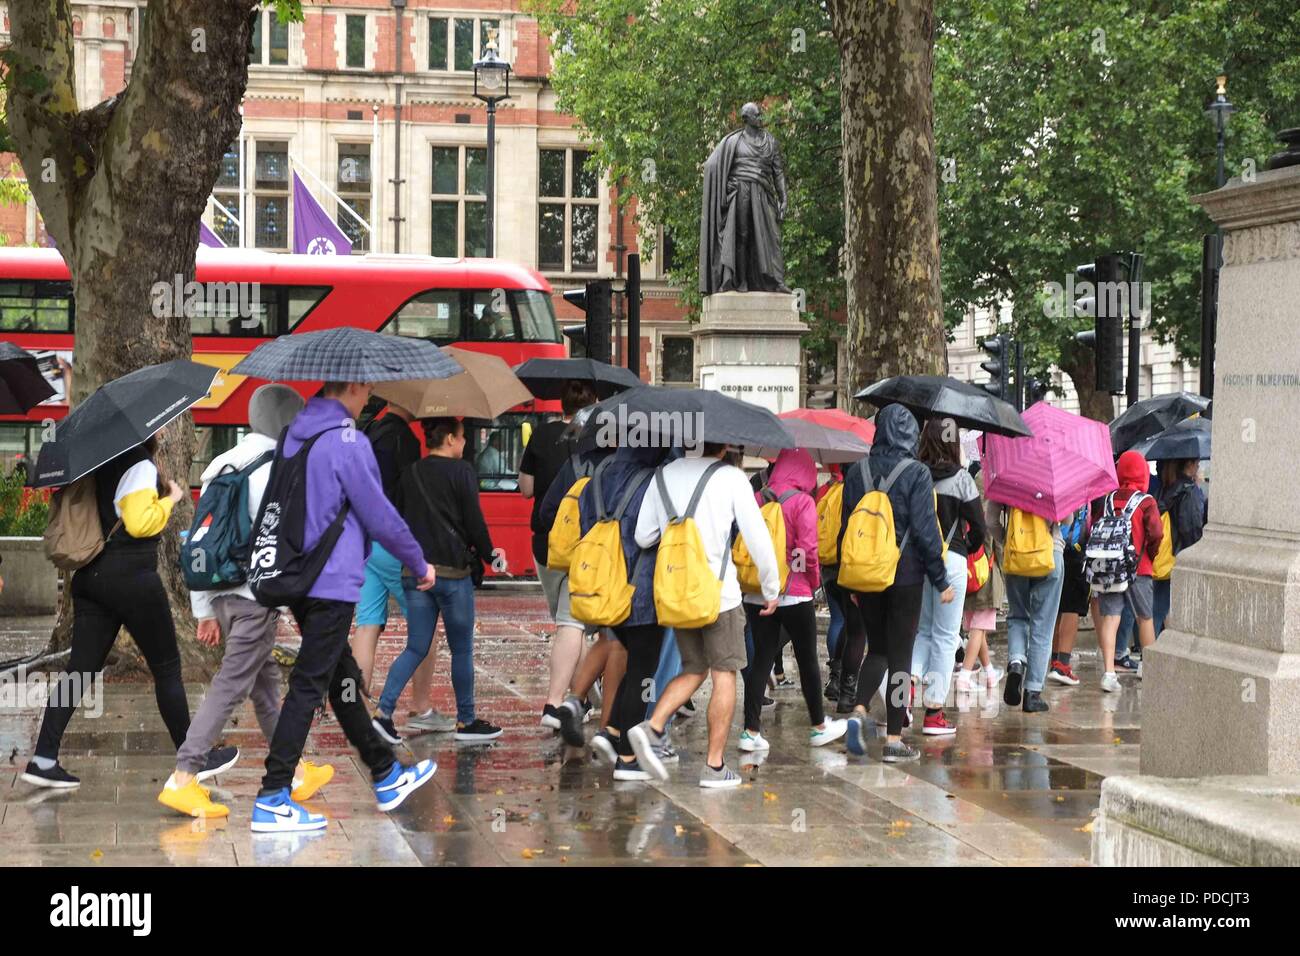 London 9th August 2018:   Tourists in Parliamnet Square shelter from the rain under umbrellas. Credit: Claire Doherty/Alamy Live News Stock Photo